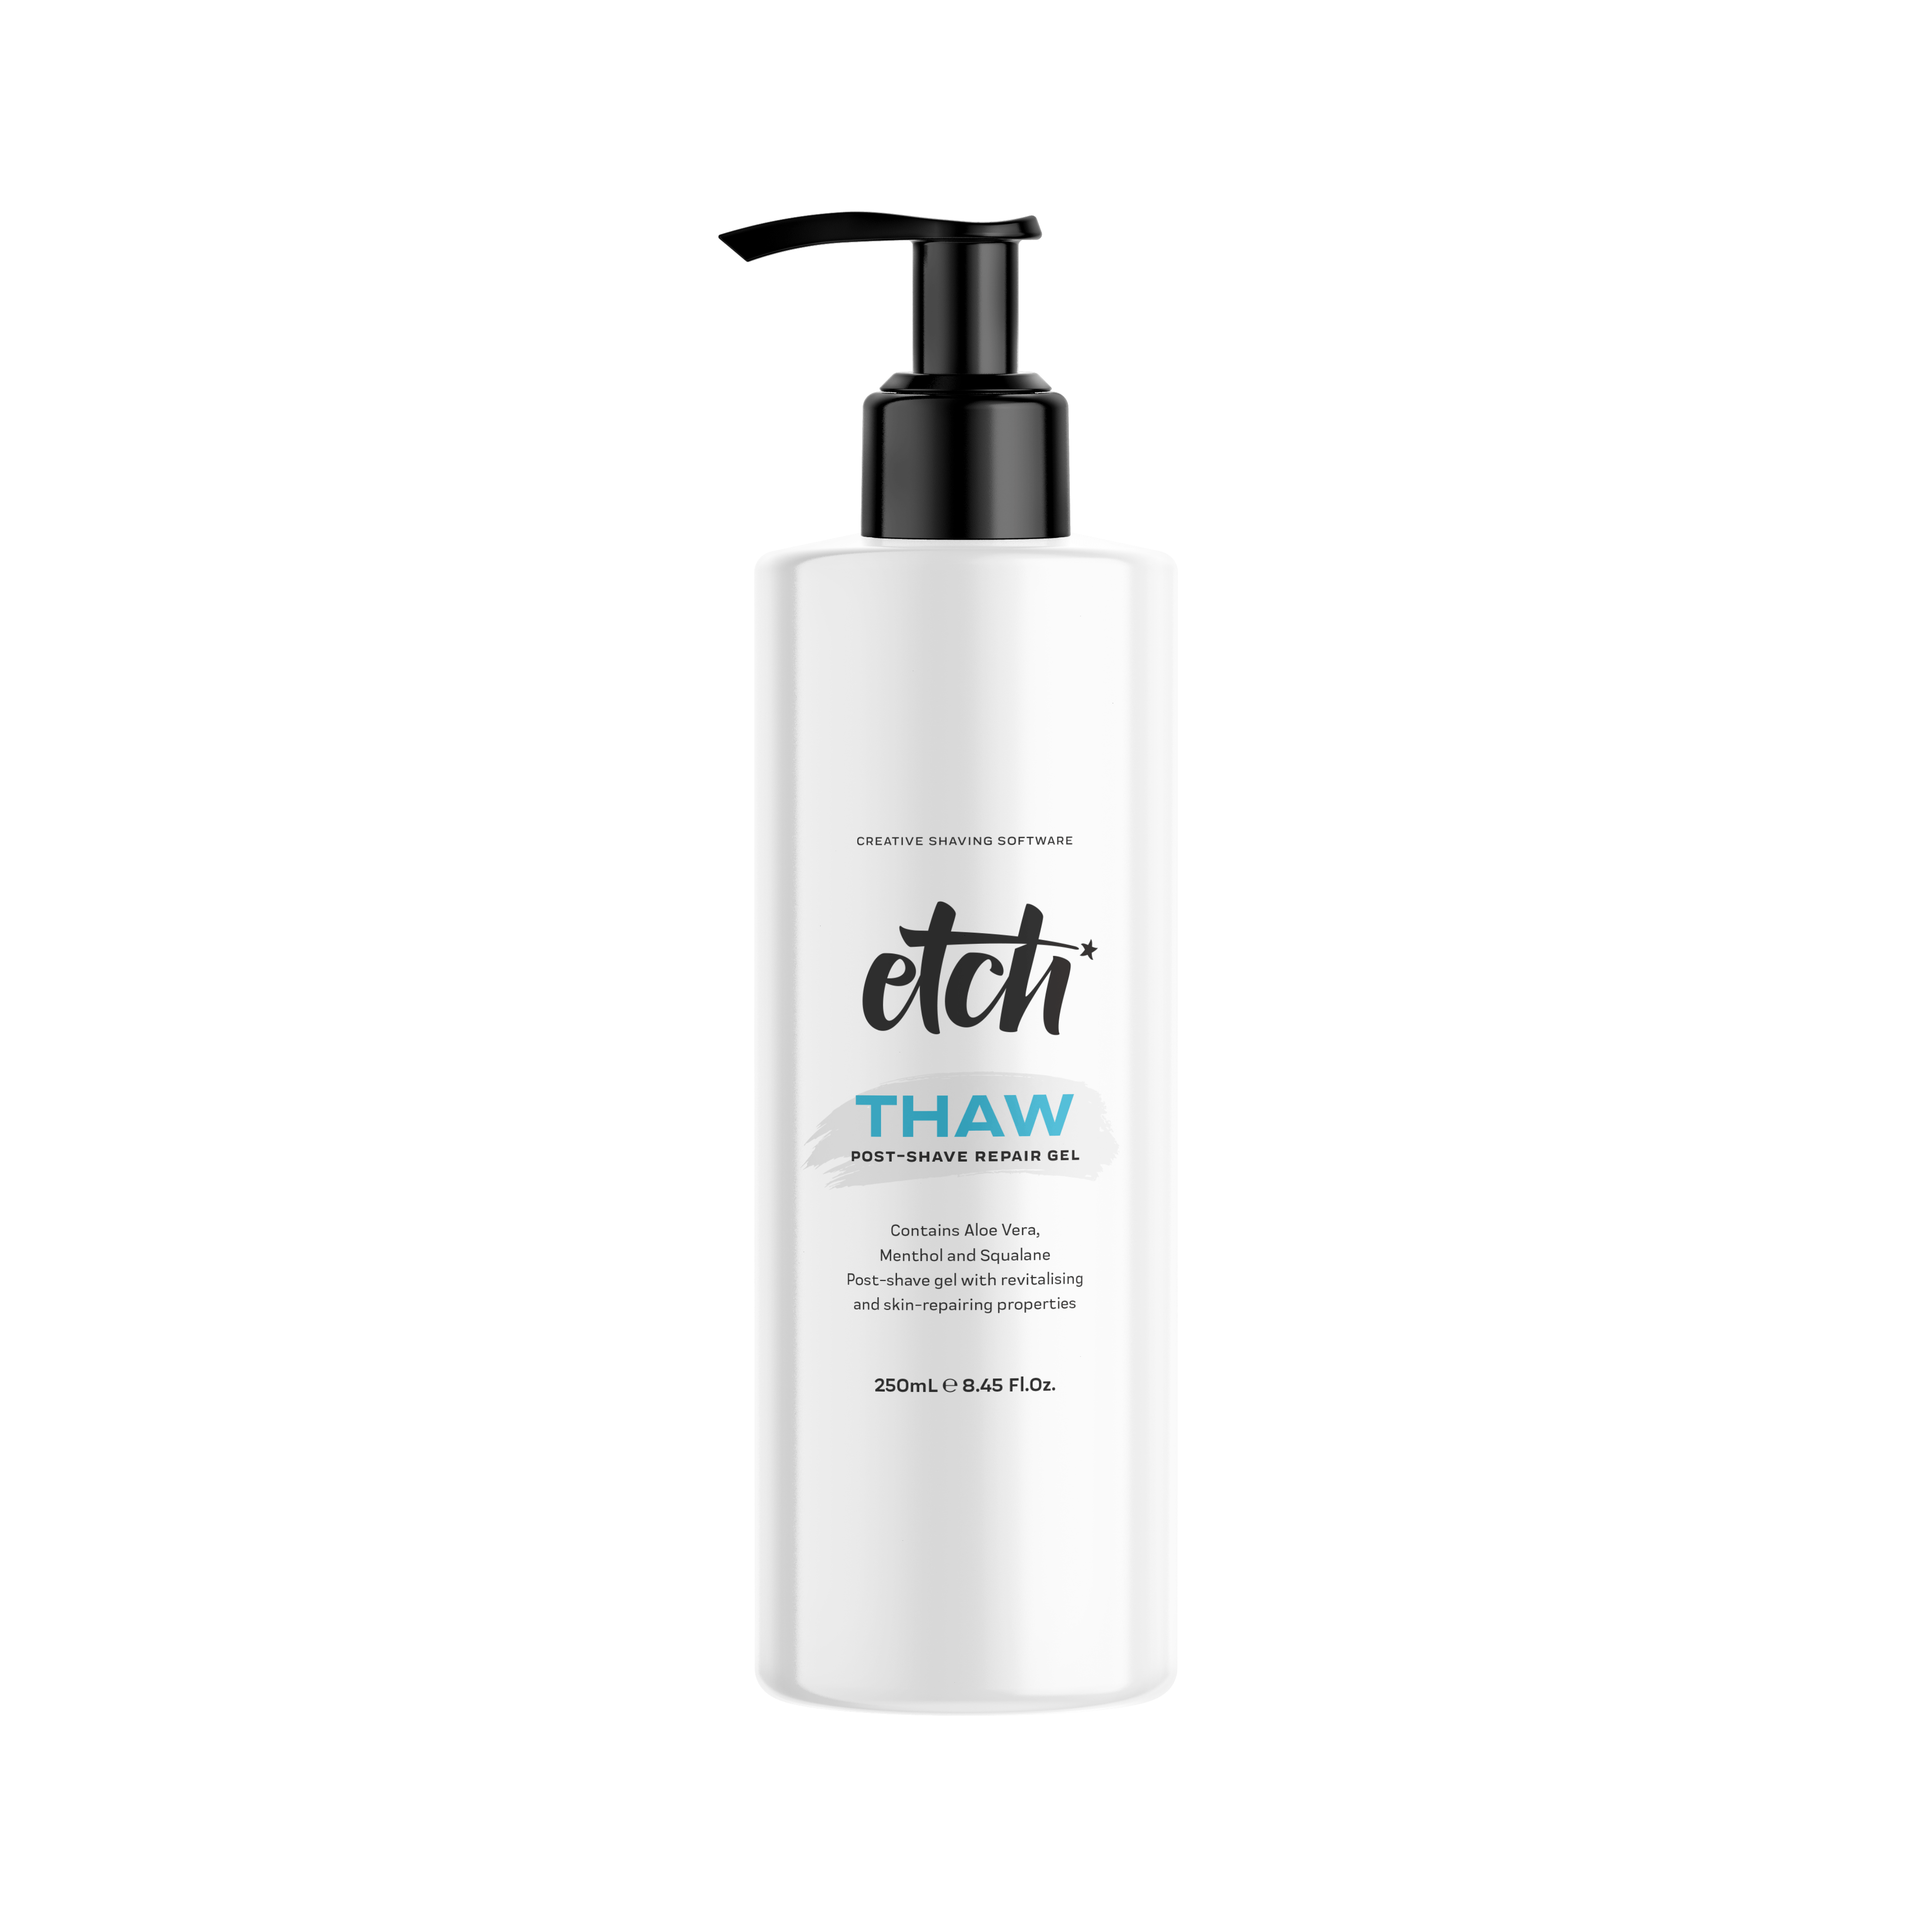 Etch Thaw Post-Shave Repair Gel